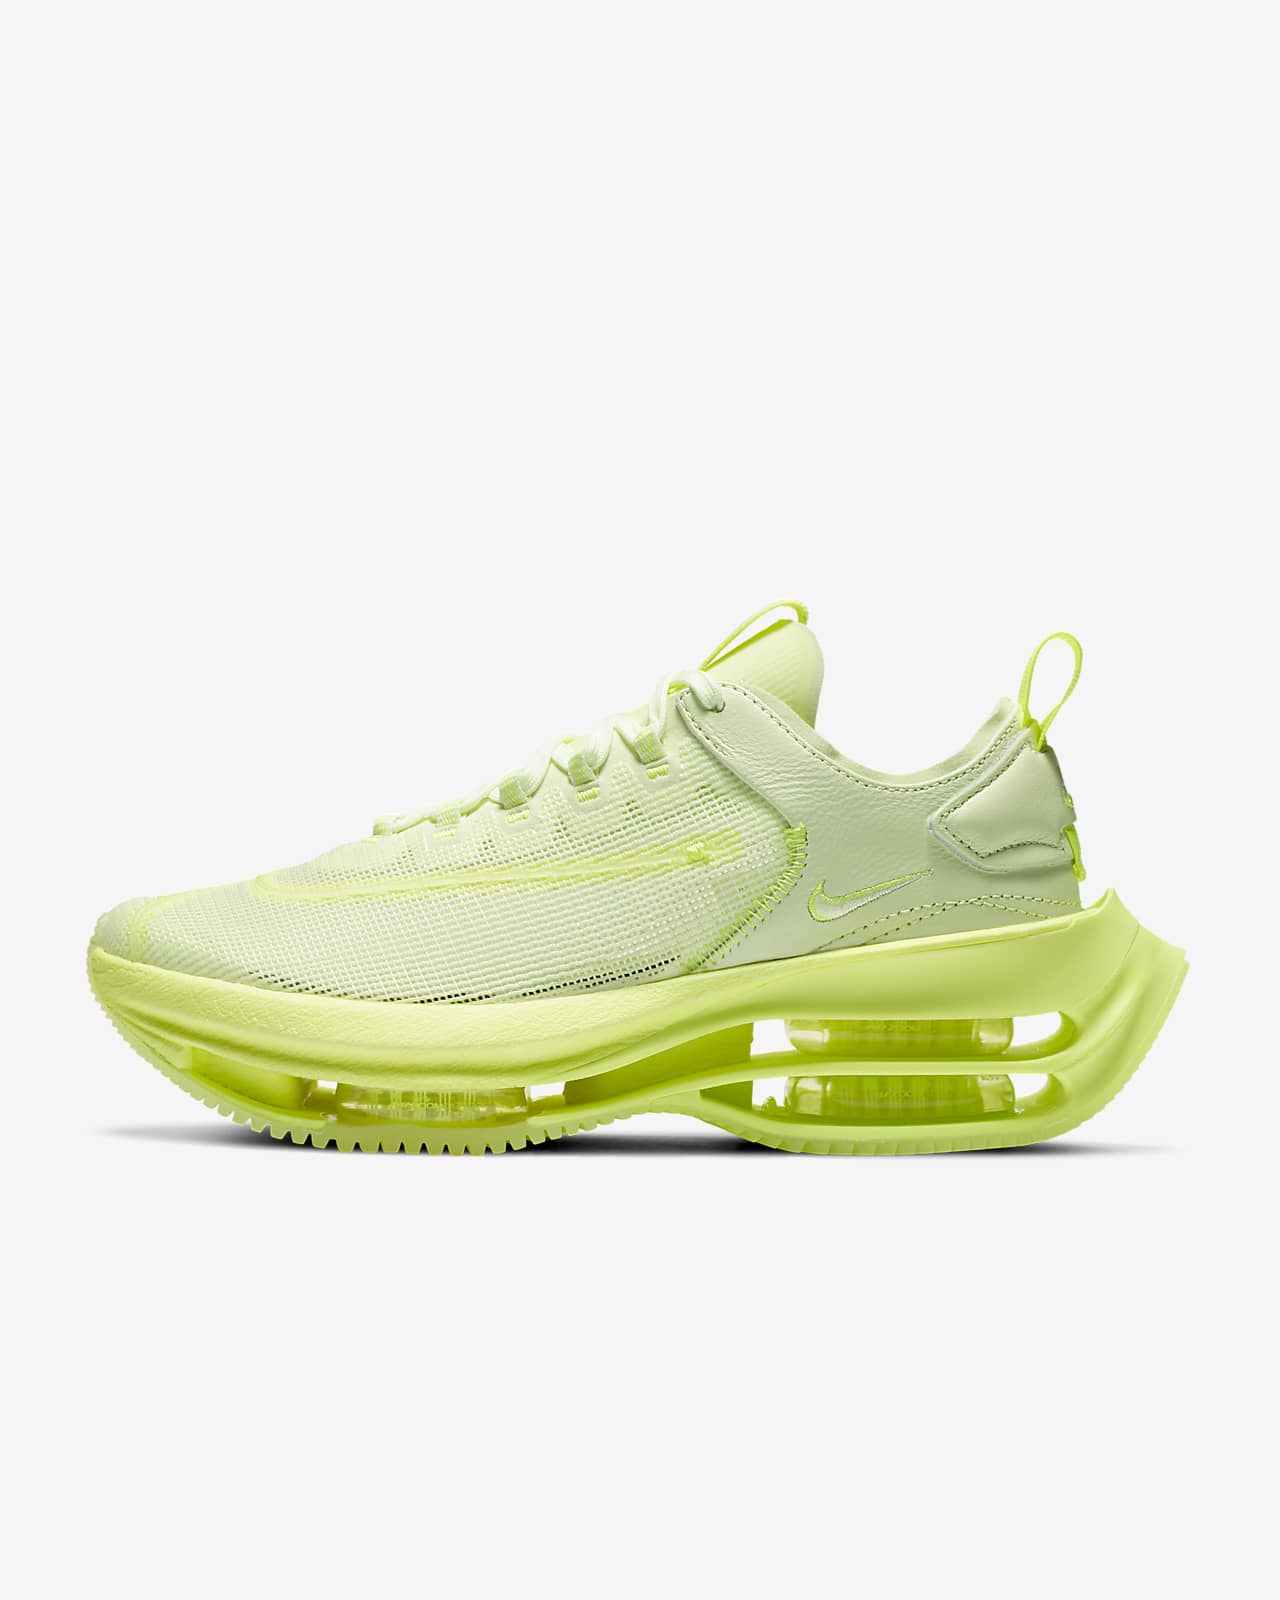 nike zoom double stacked volt black